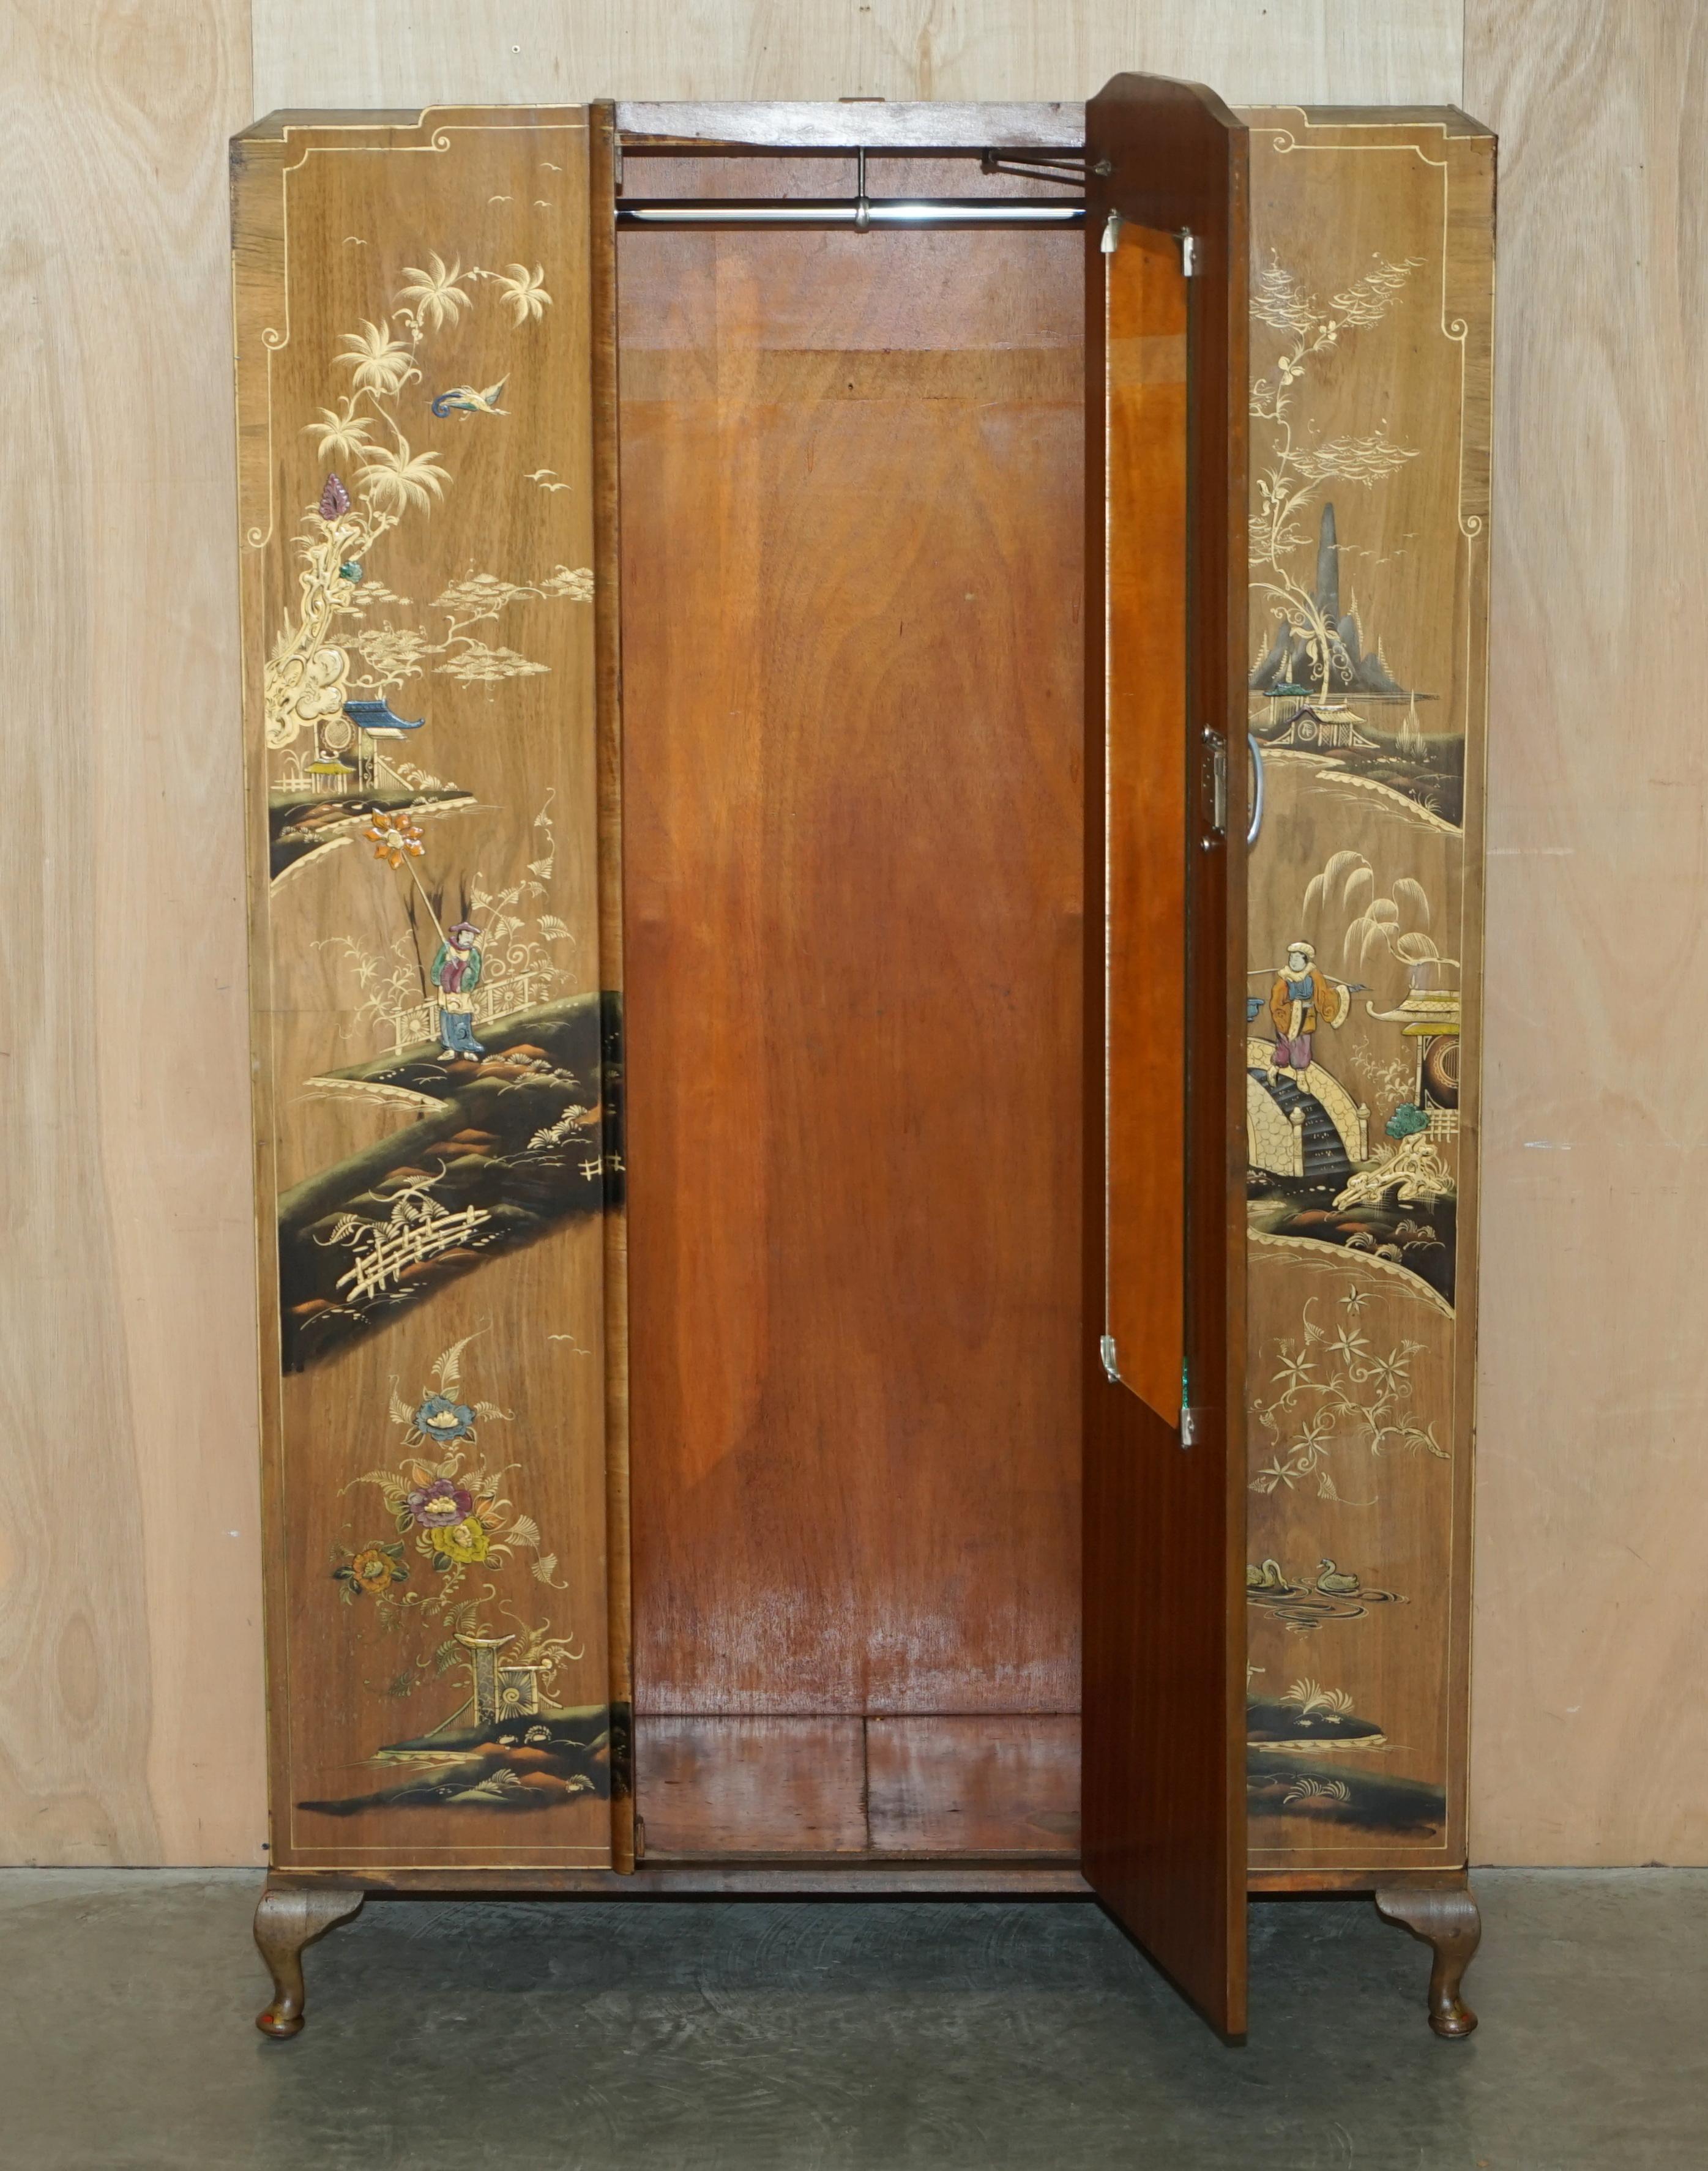 EXQUISITE CHINESE EXPORT CHINOiSERIES WALNUT DOUBLE WARDROBE PART OF A SUITE For Sale 9